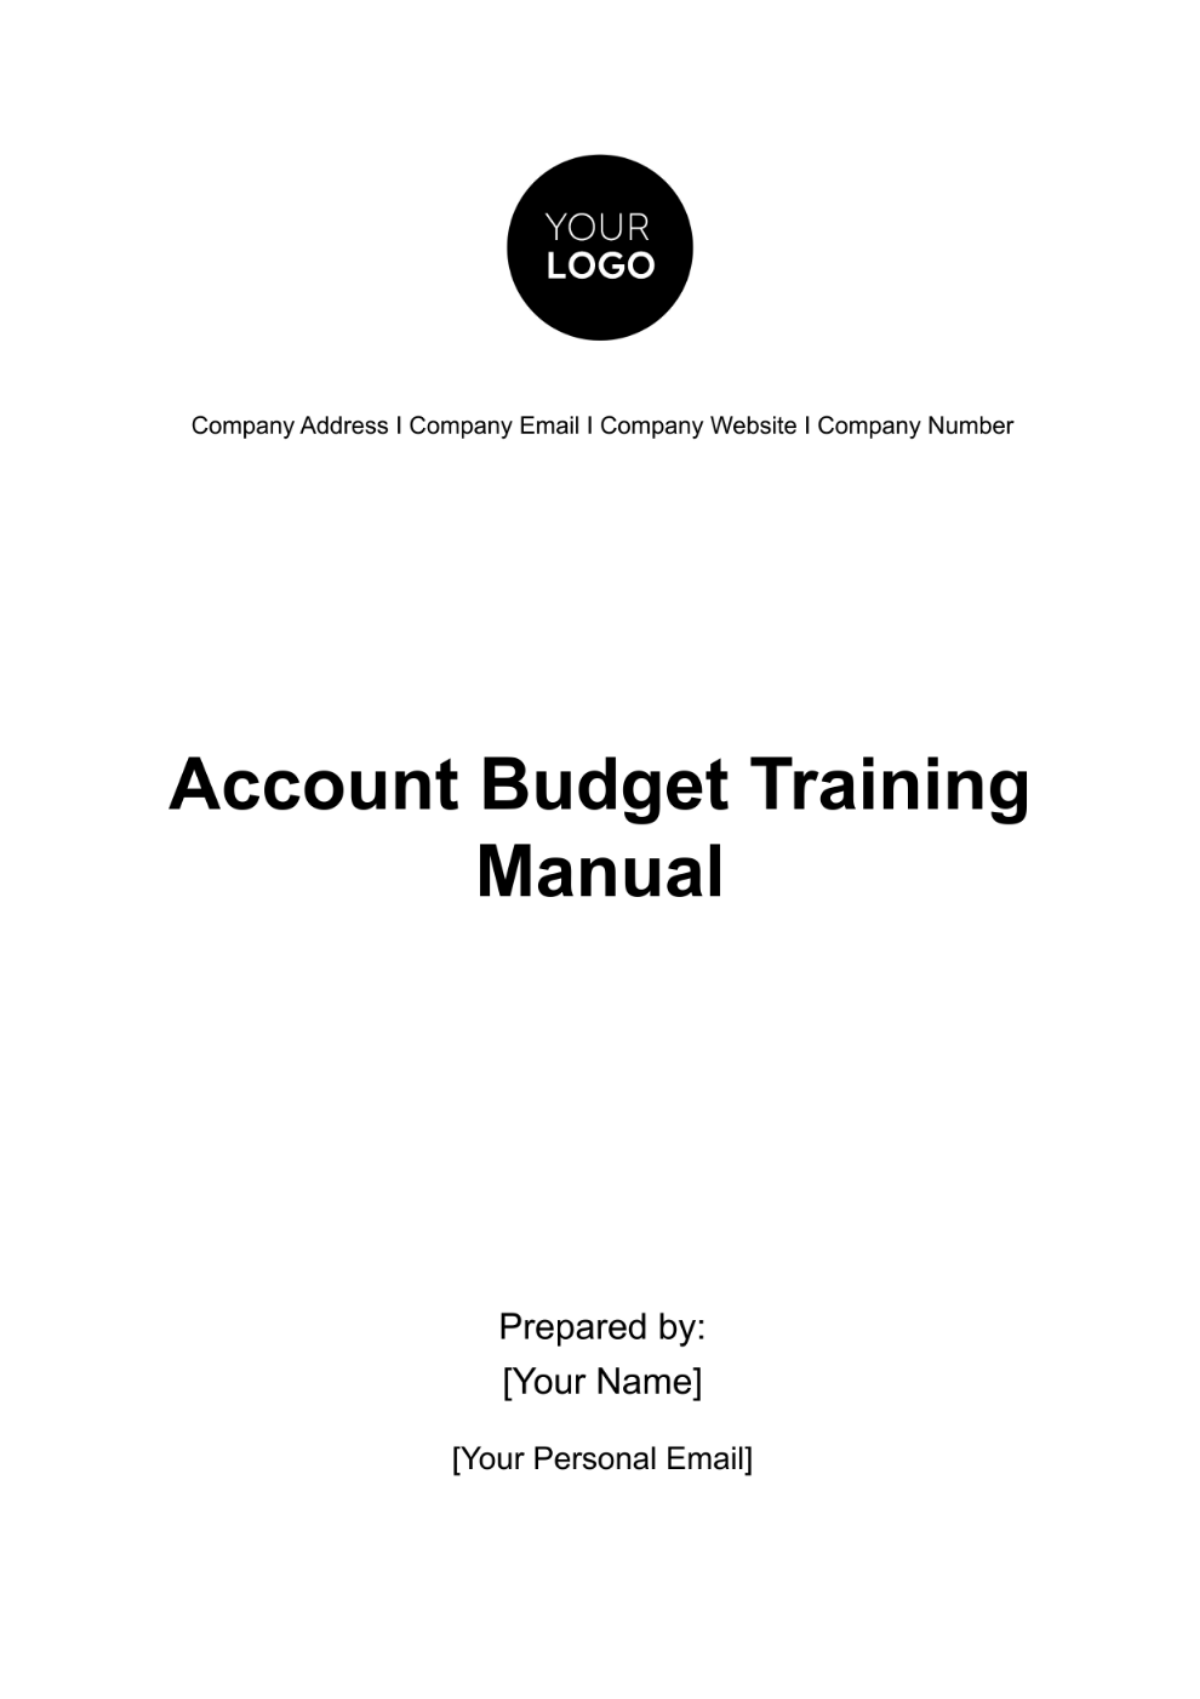 Account Budget Training Manual Template